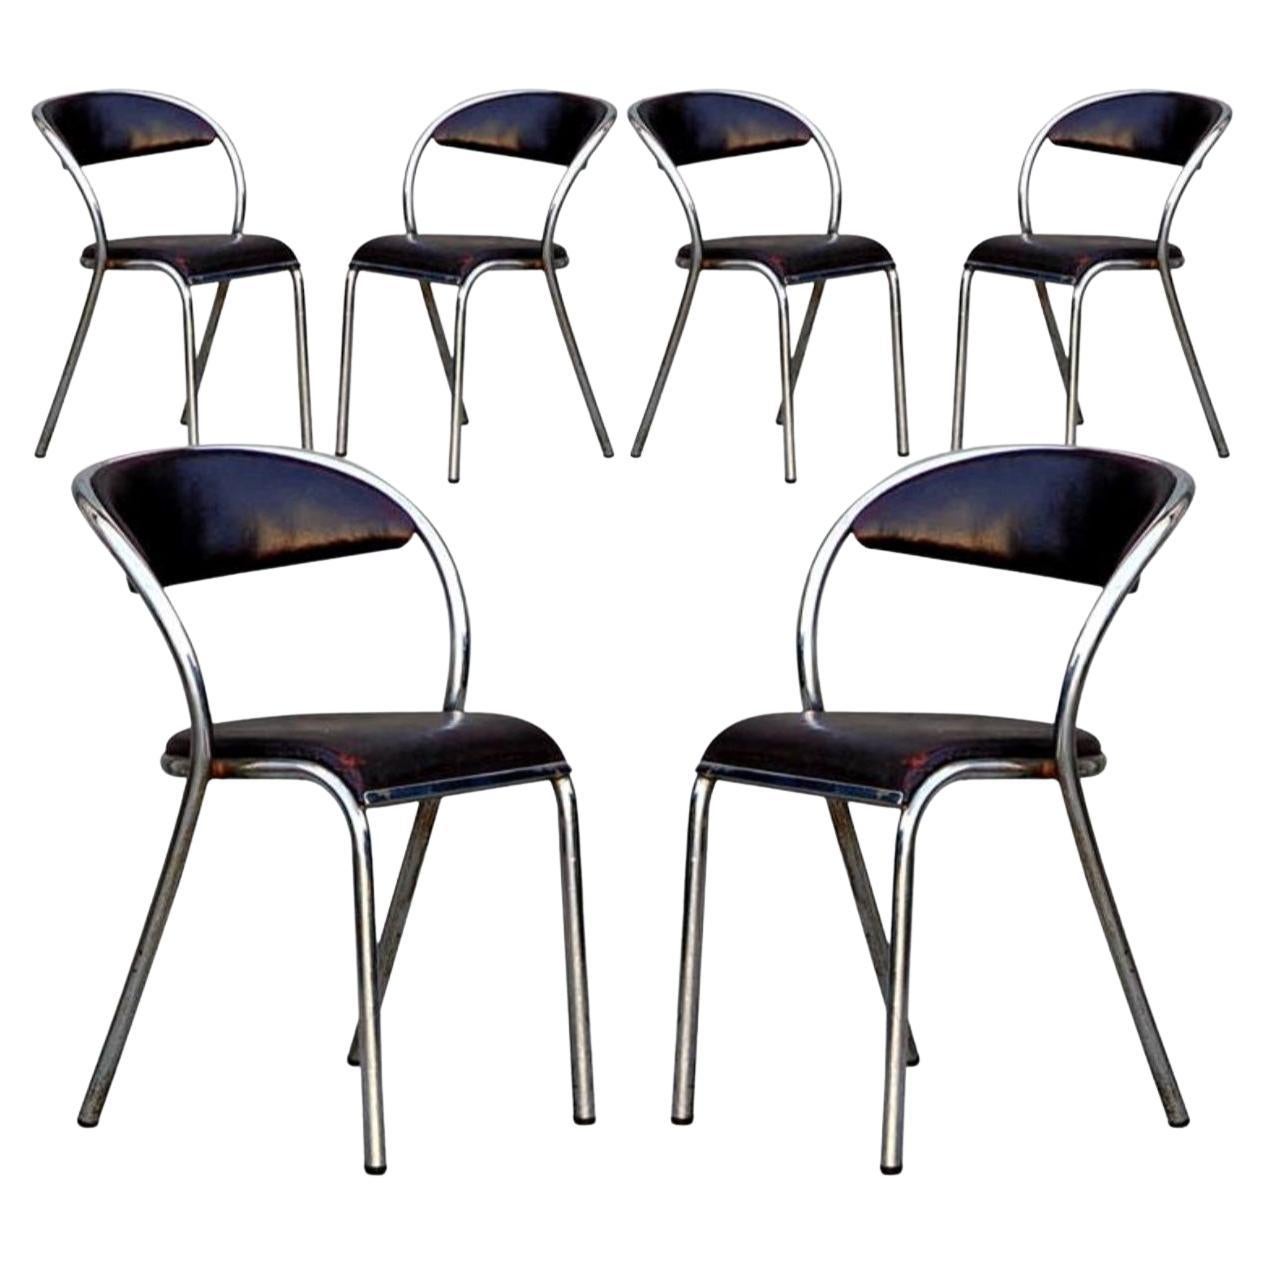 Set of 6 Comfortable French Modernist Chairs